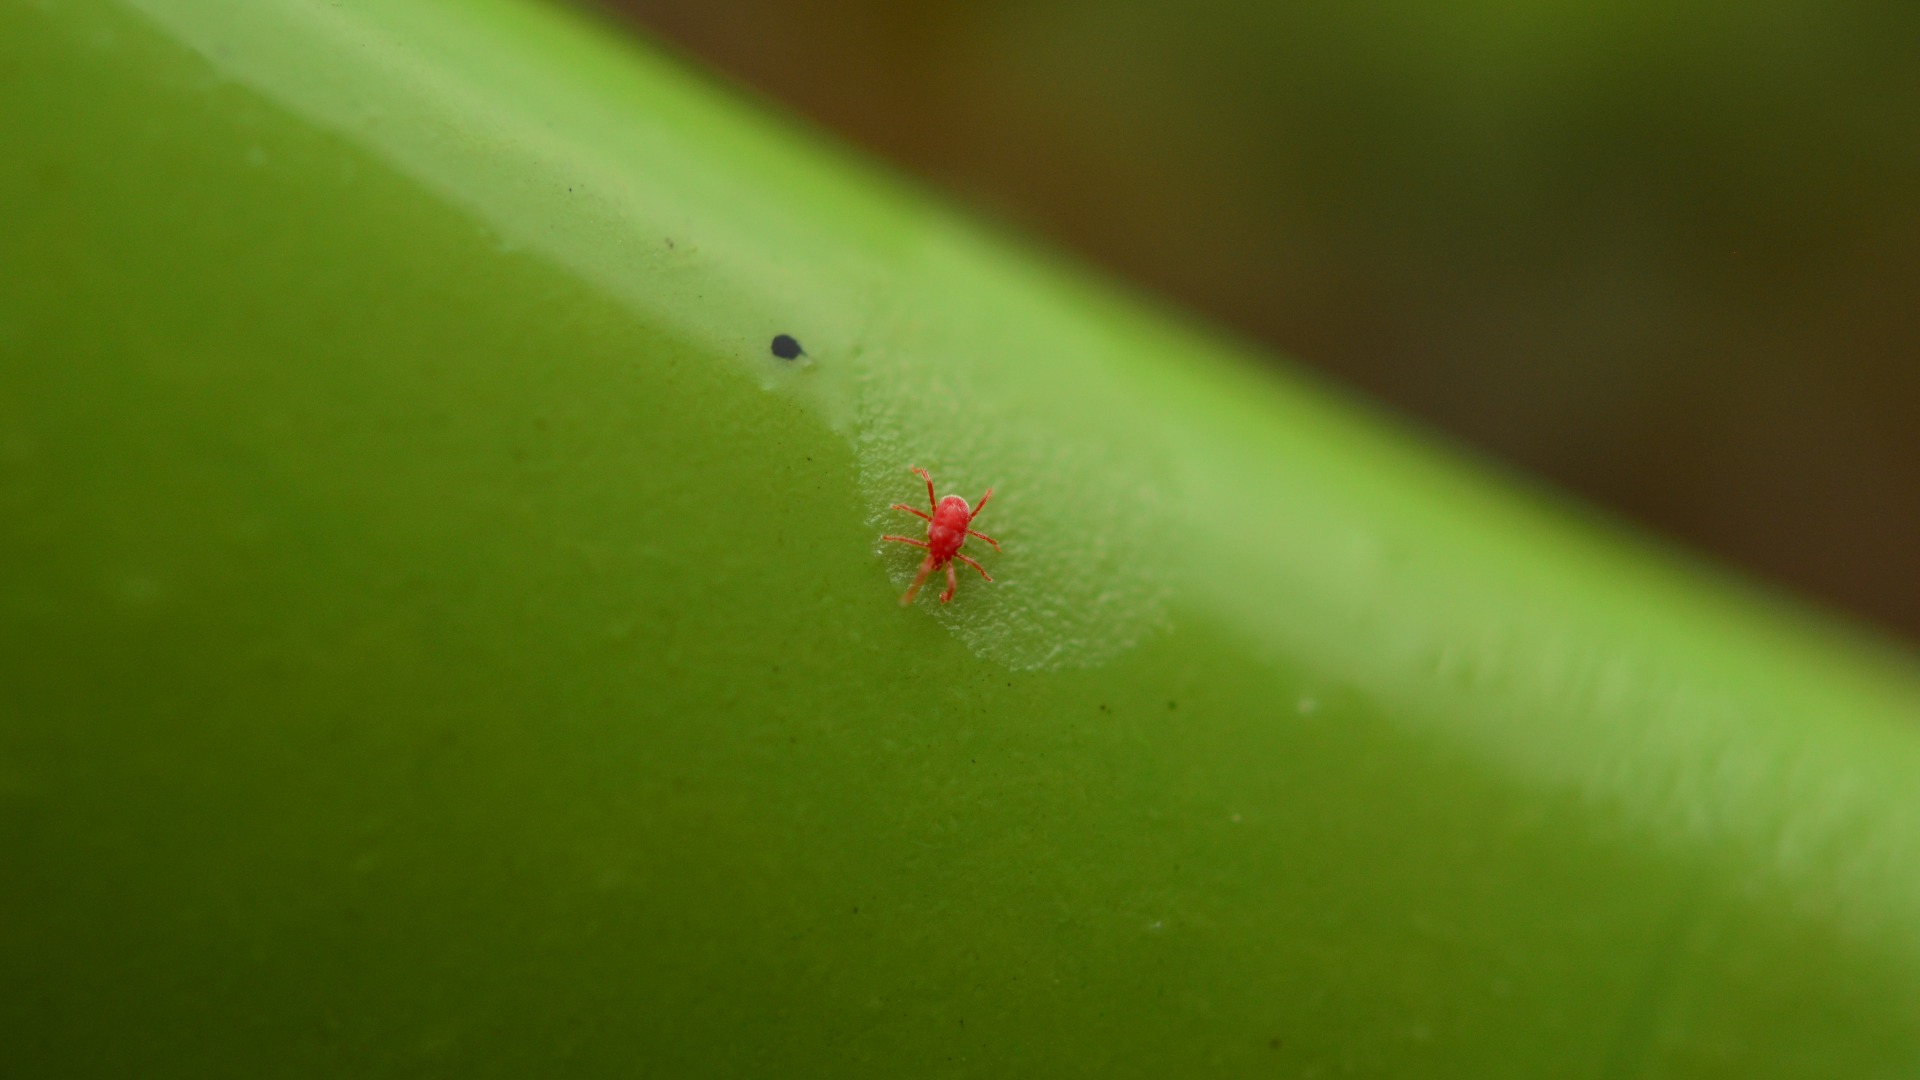 Little red chigger on green leaf in Plano, TX.